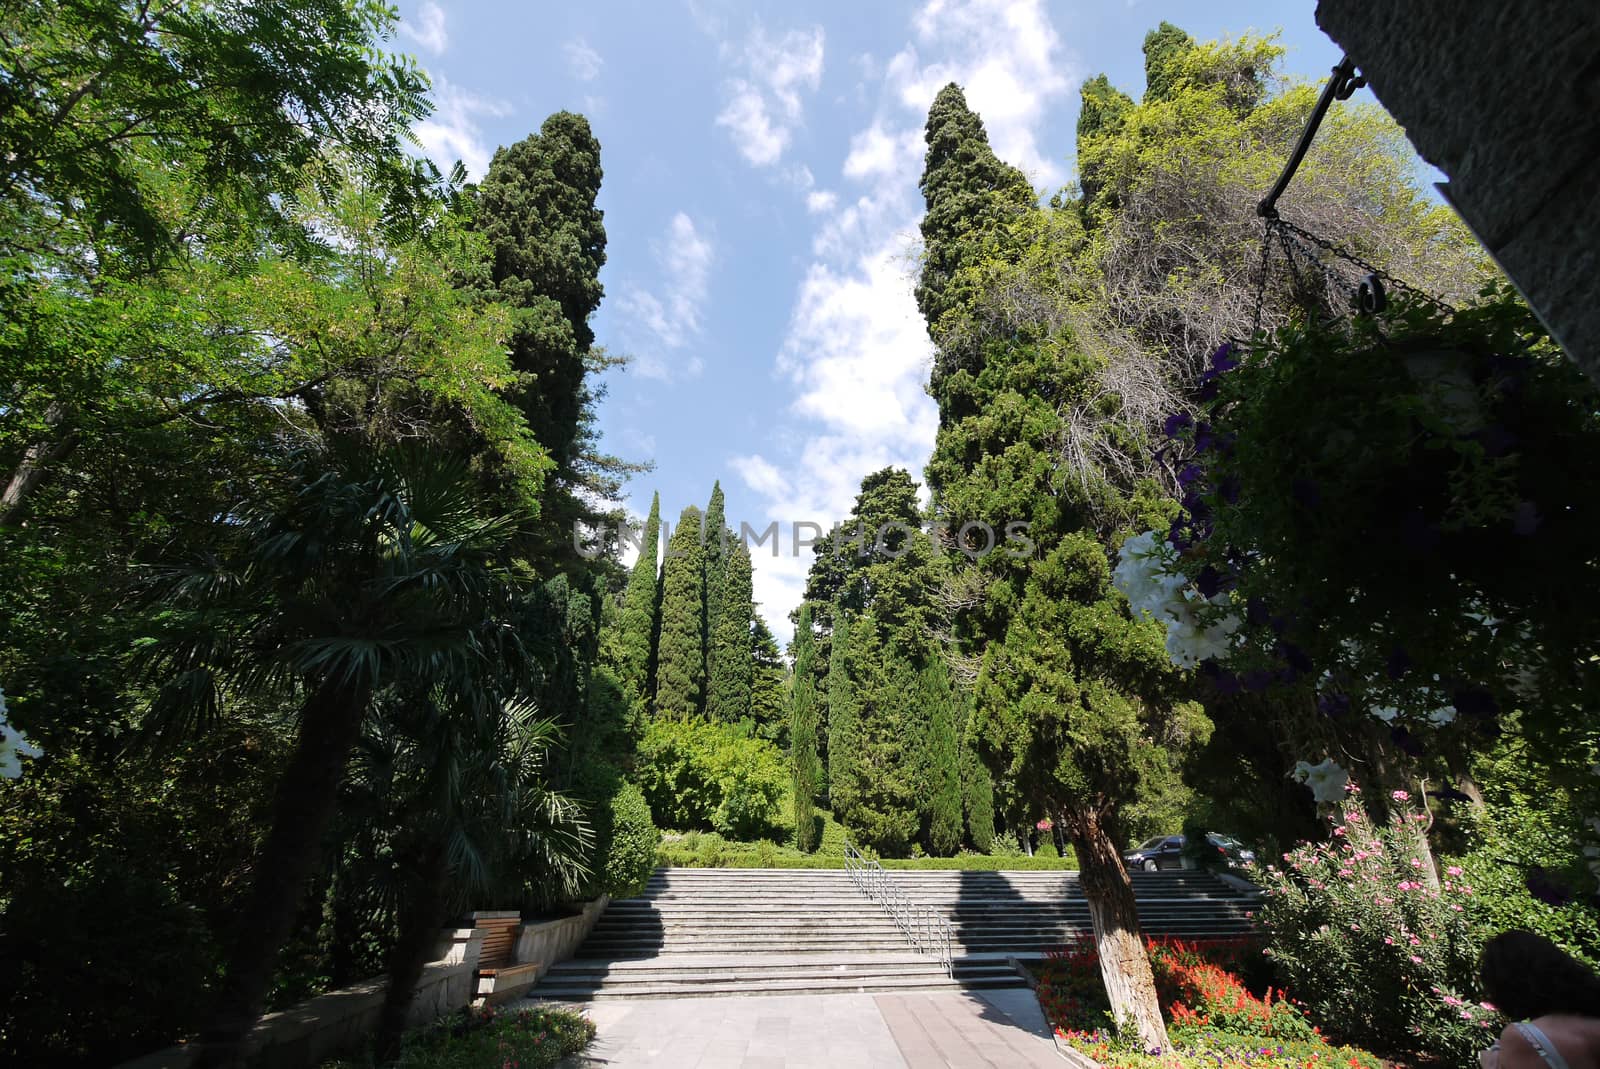 A beautiful view of the blue sky with rare clouds as if lying on the tops of tall, dense trees growing in the park around a wide staircase with narrow stairs.